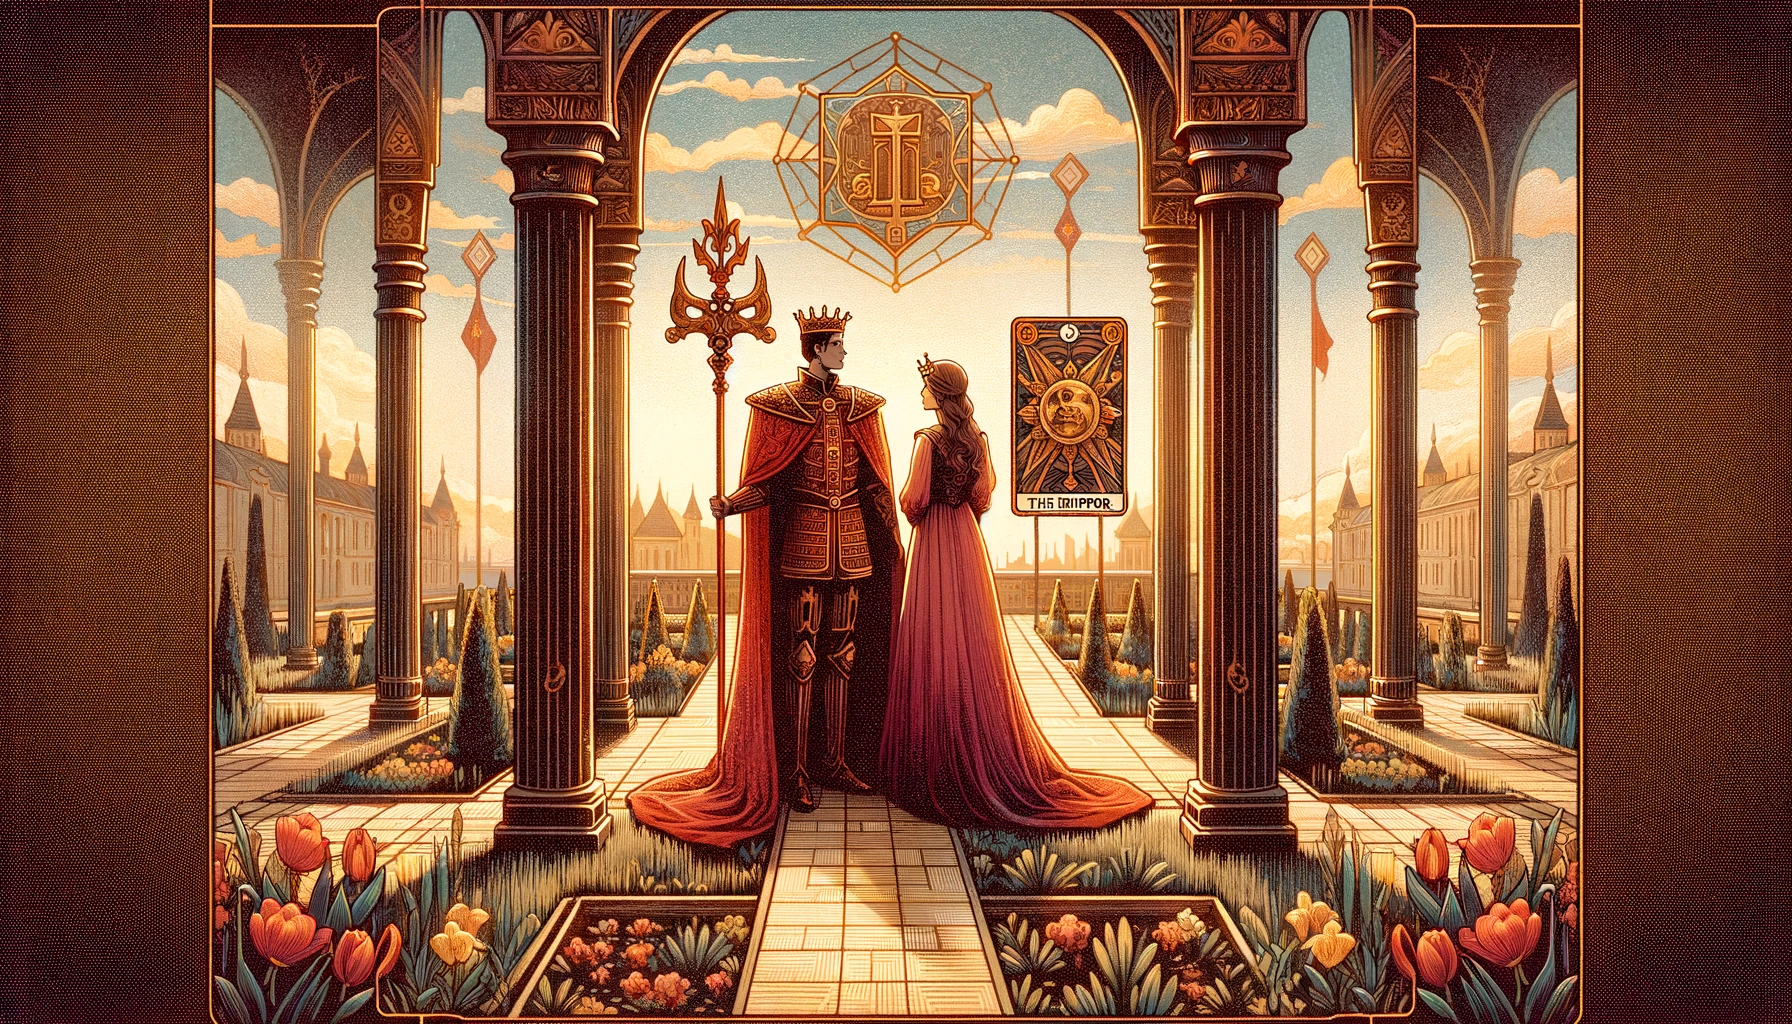 "A confident couple standing together in a structured and secure environment, symbolizing the solid foundation of their relationship, with subtle incorporations of imperial figures or symbols of authority in the background to emphasize the theme of leadership and structure in love."